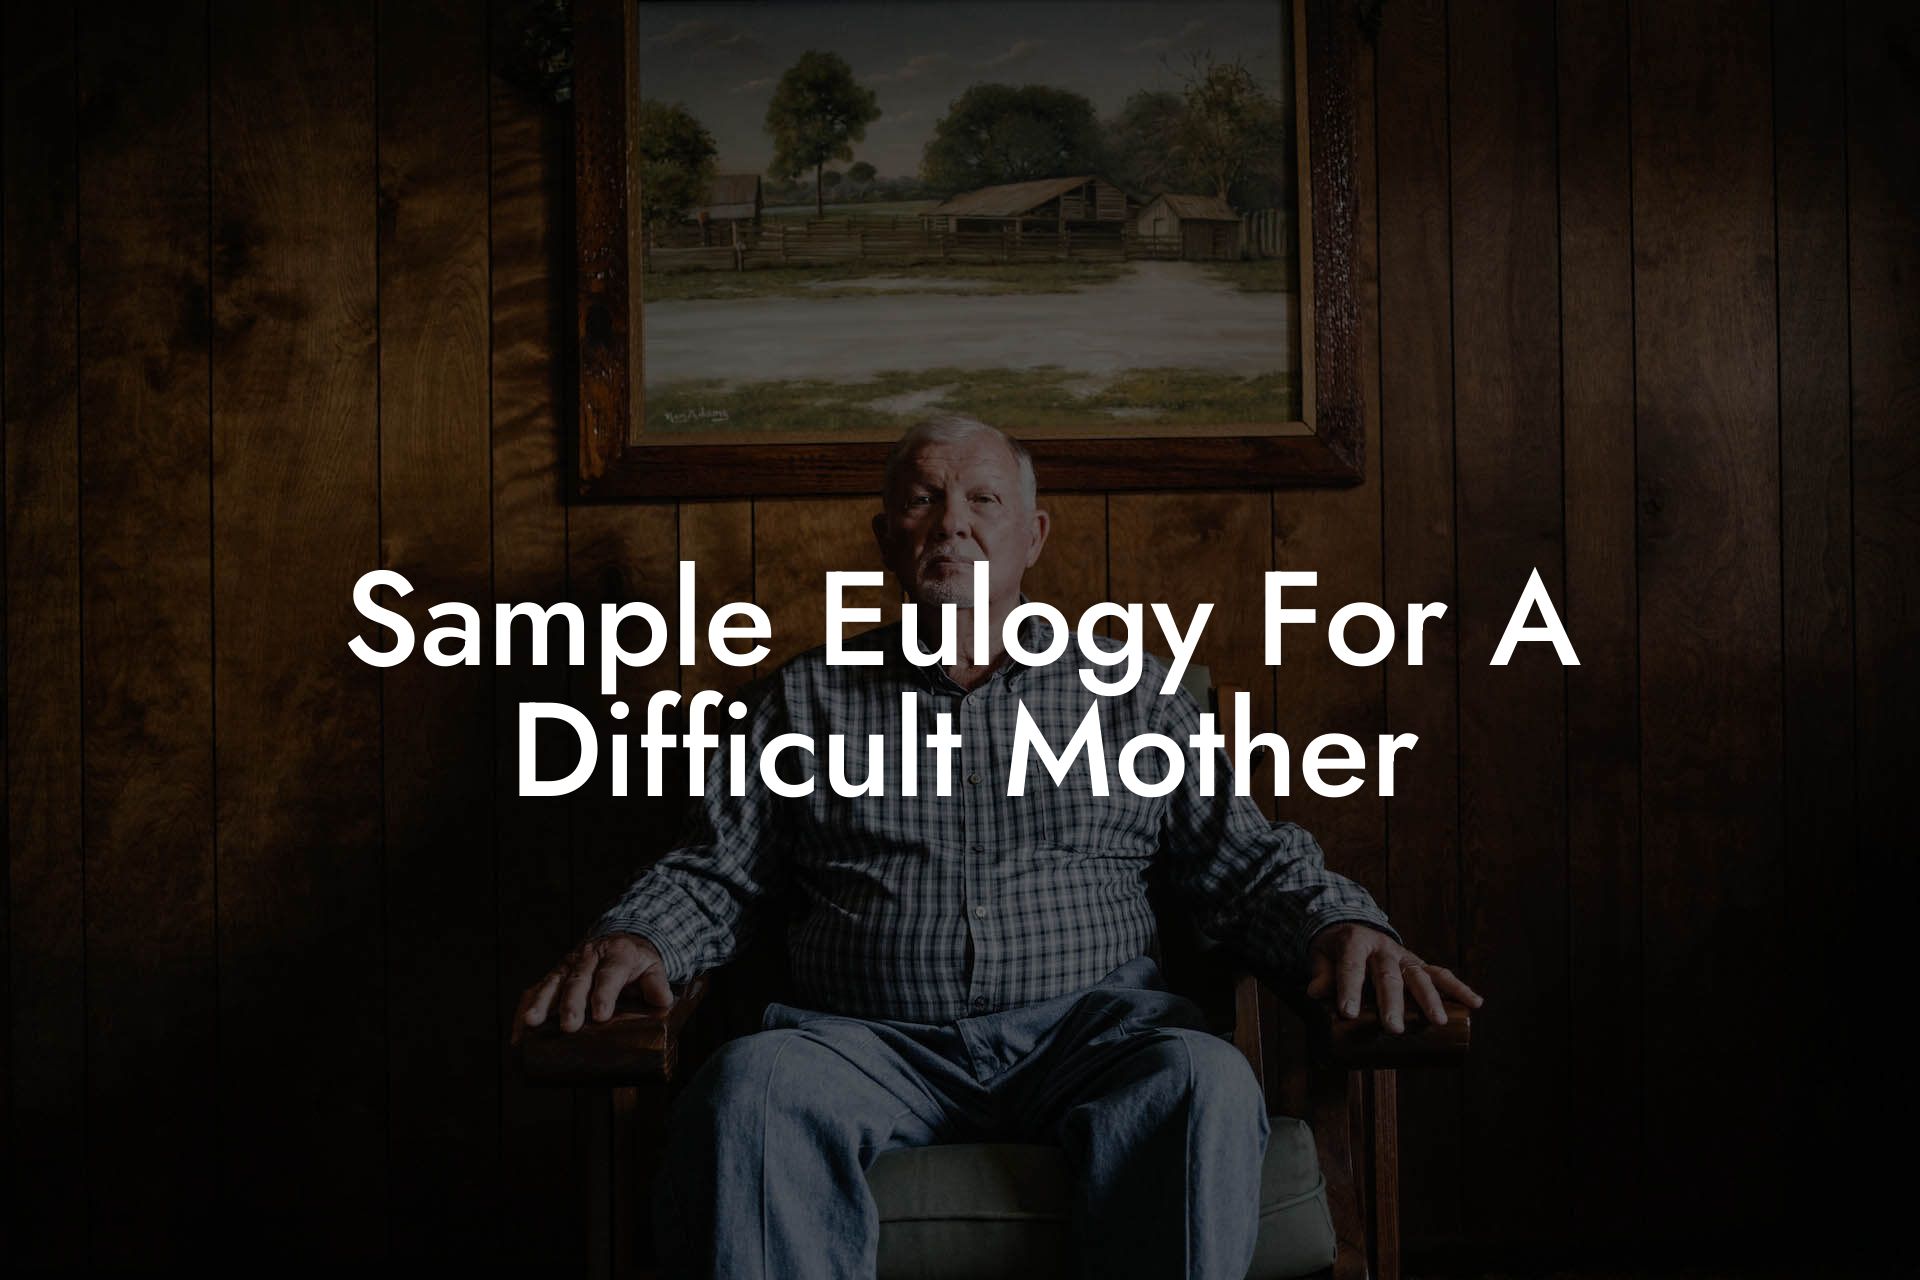 Sample Eulogy For A Difficult Mother